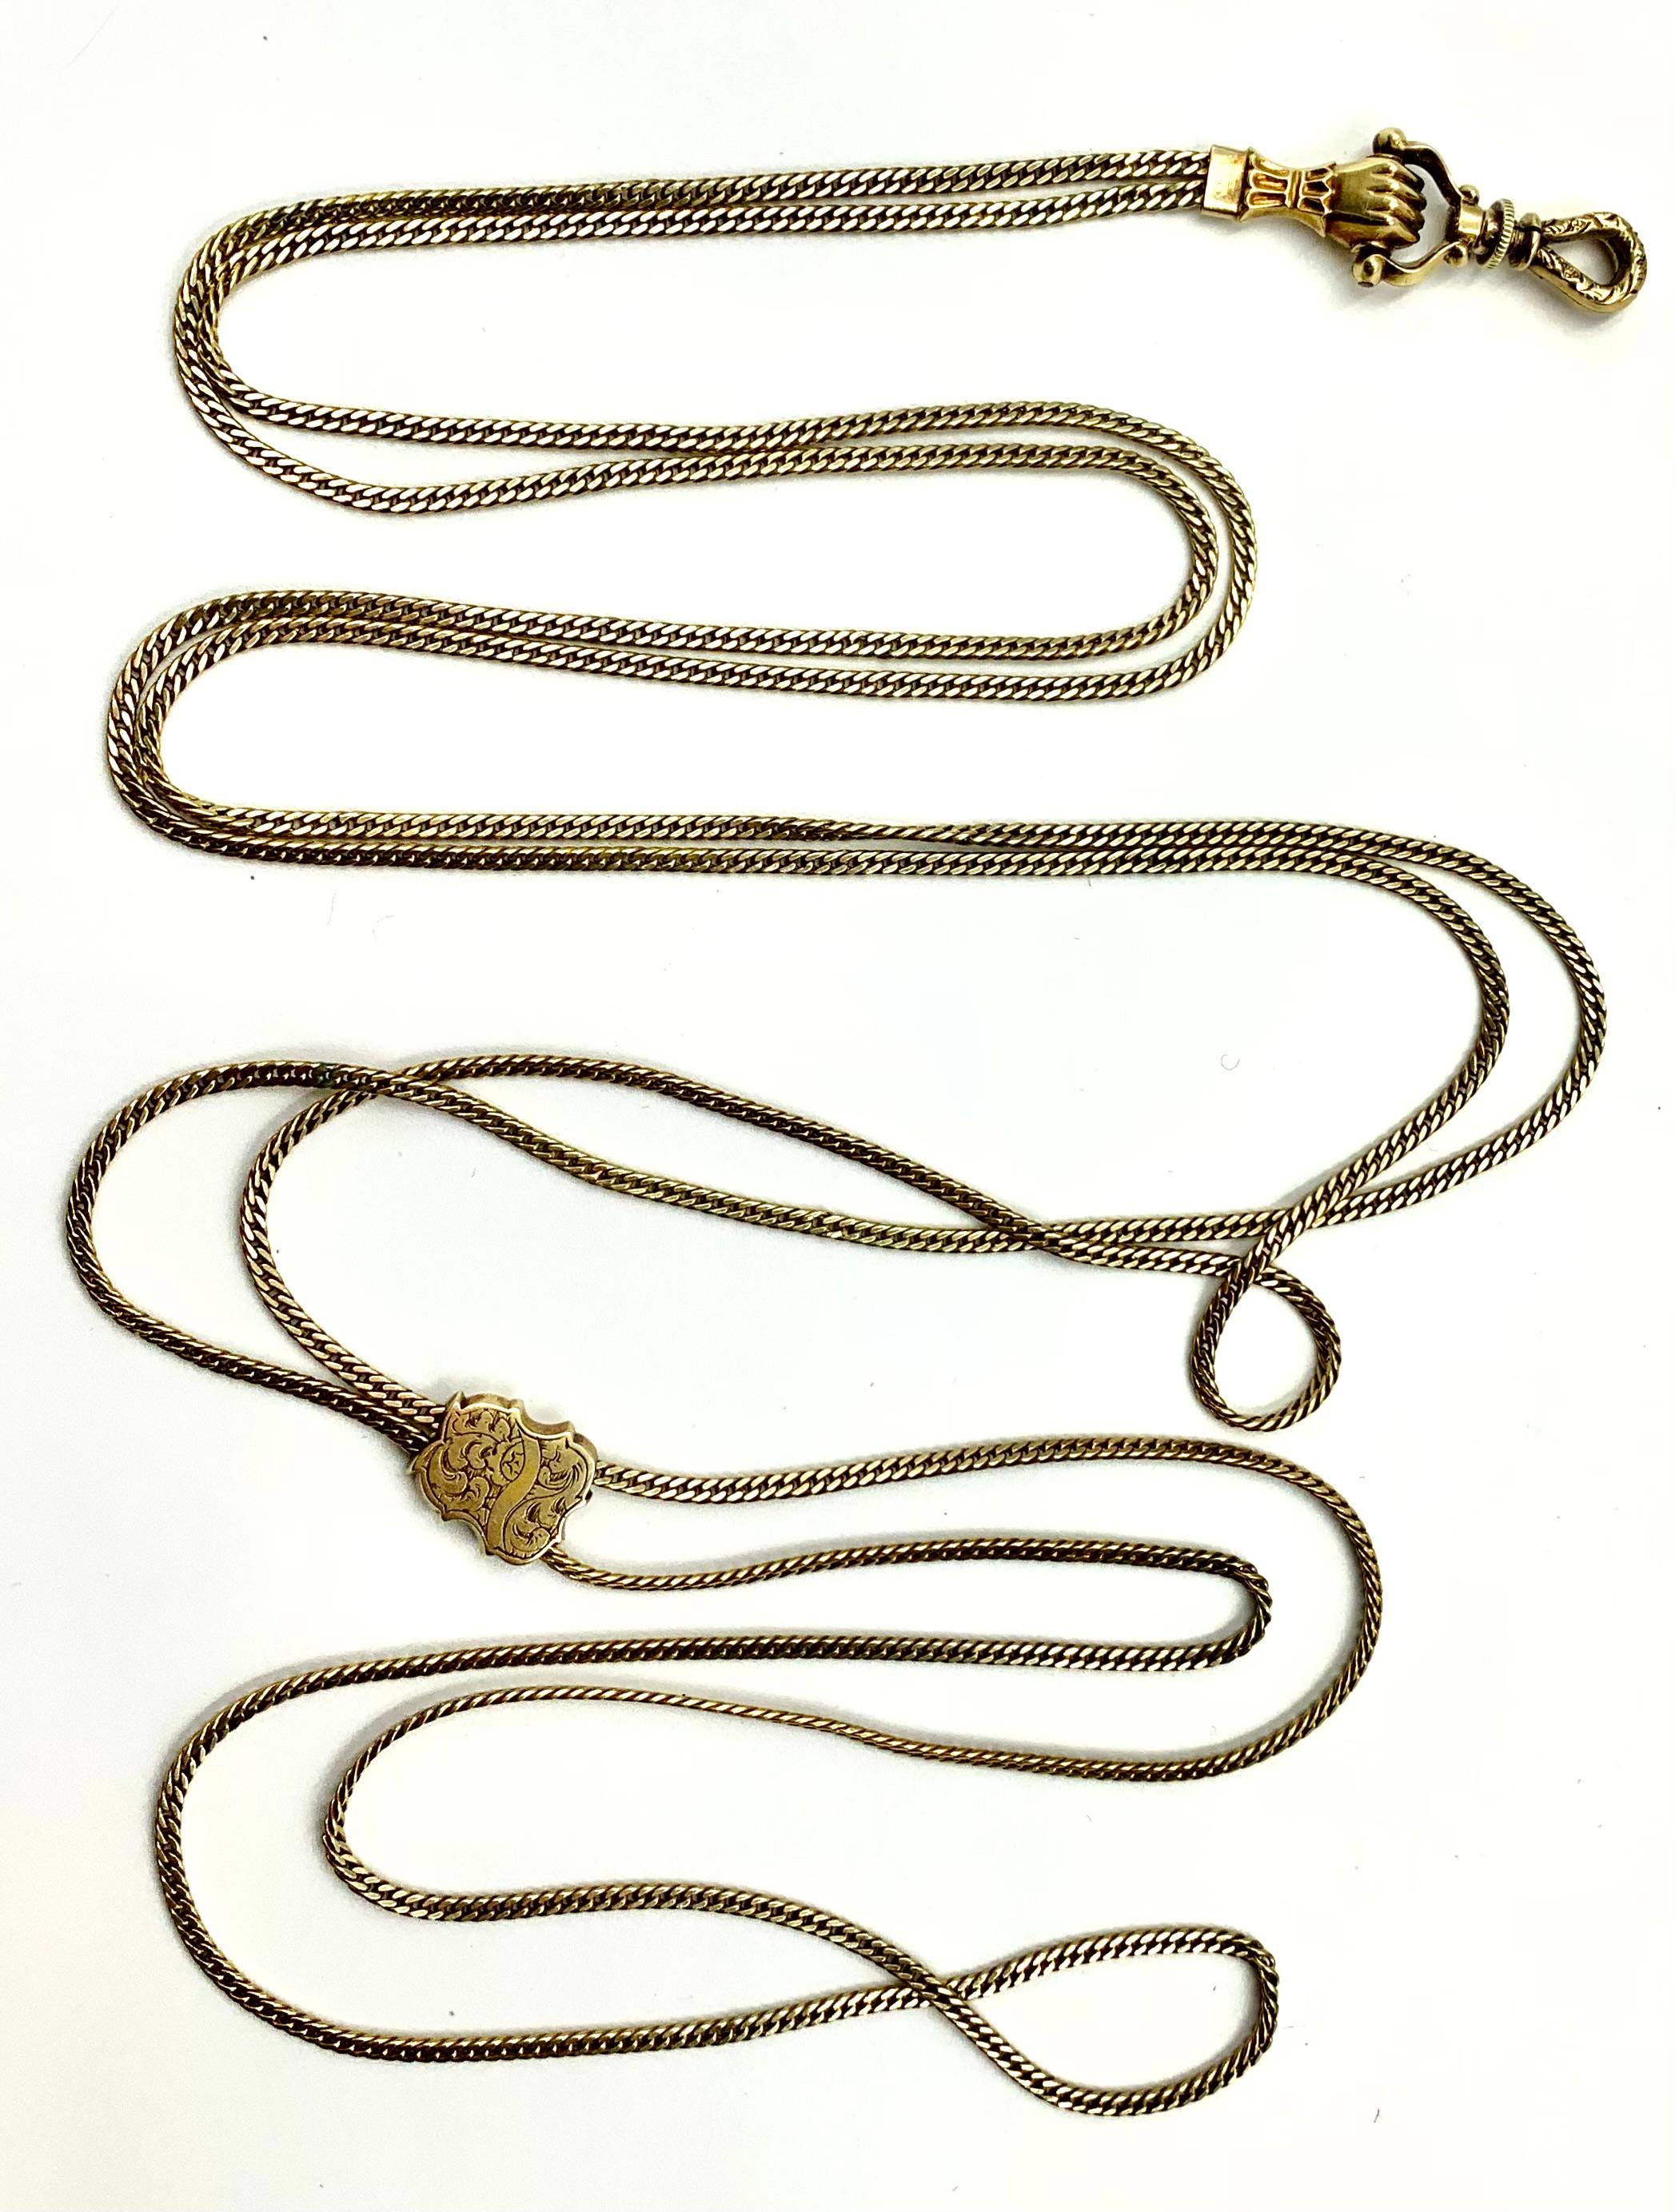 Exceptionally Long Antique 18K Gold Mano Sautoir Slide Chain Necklace Circa 1840 For Sale 3